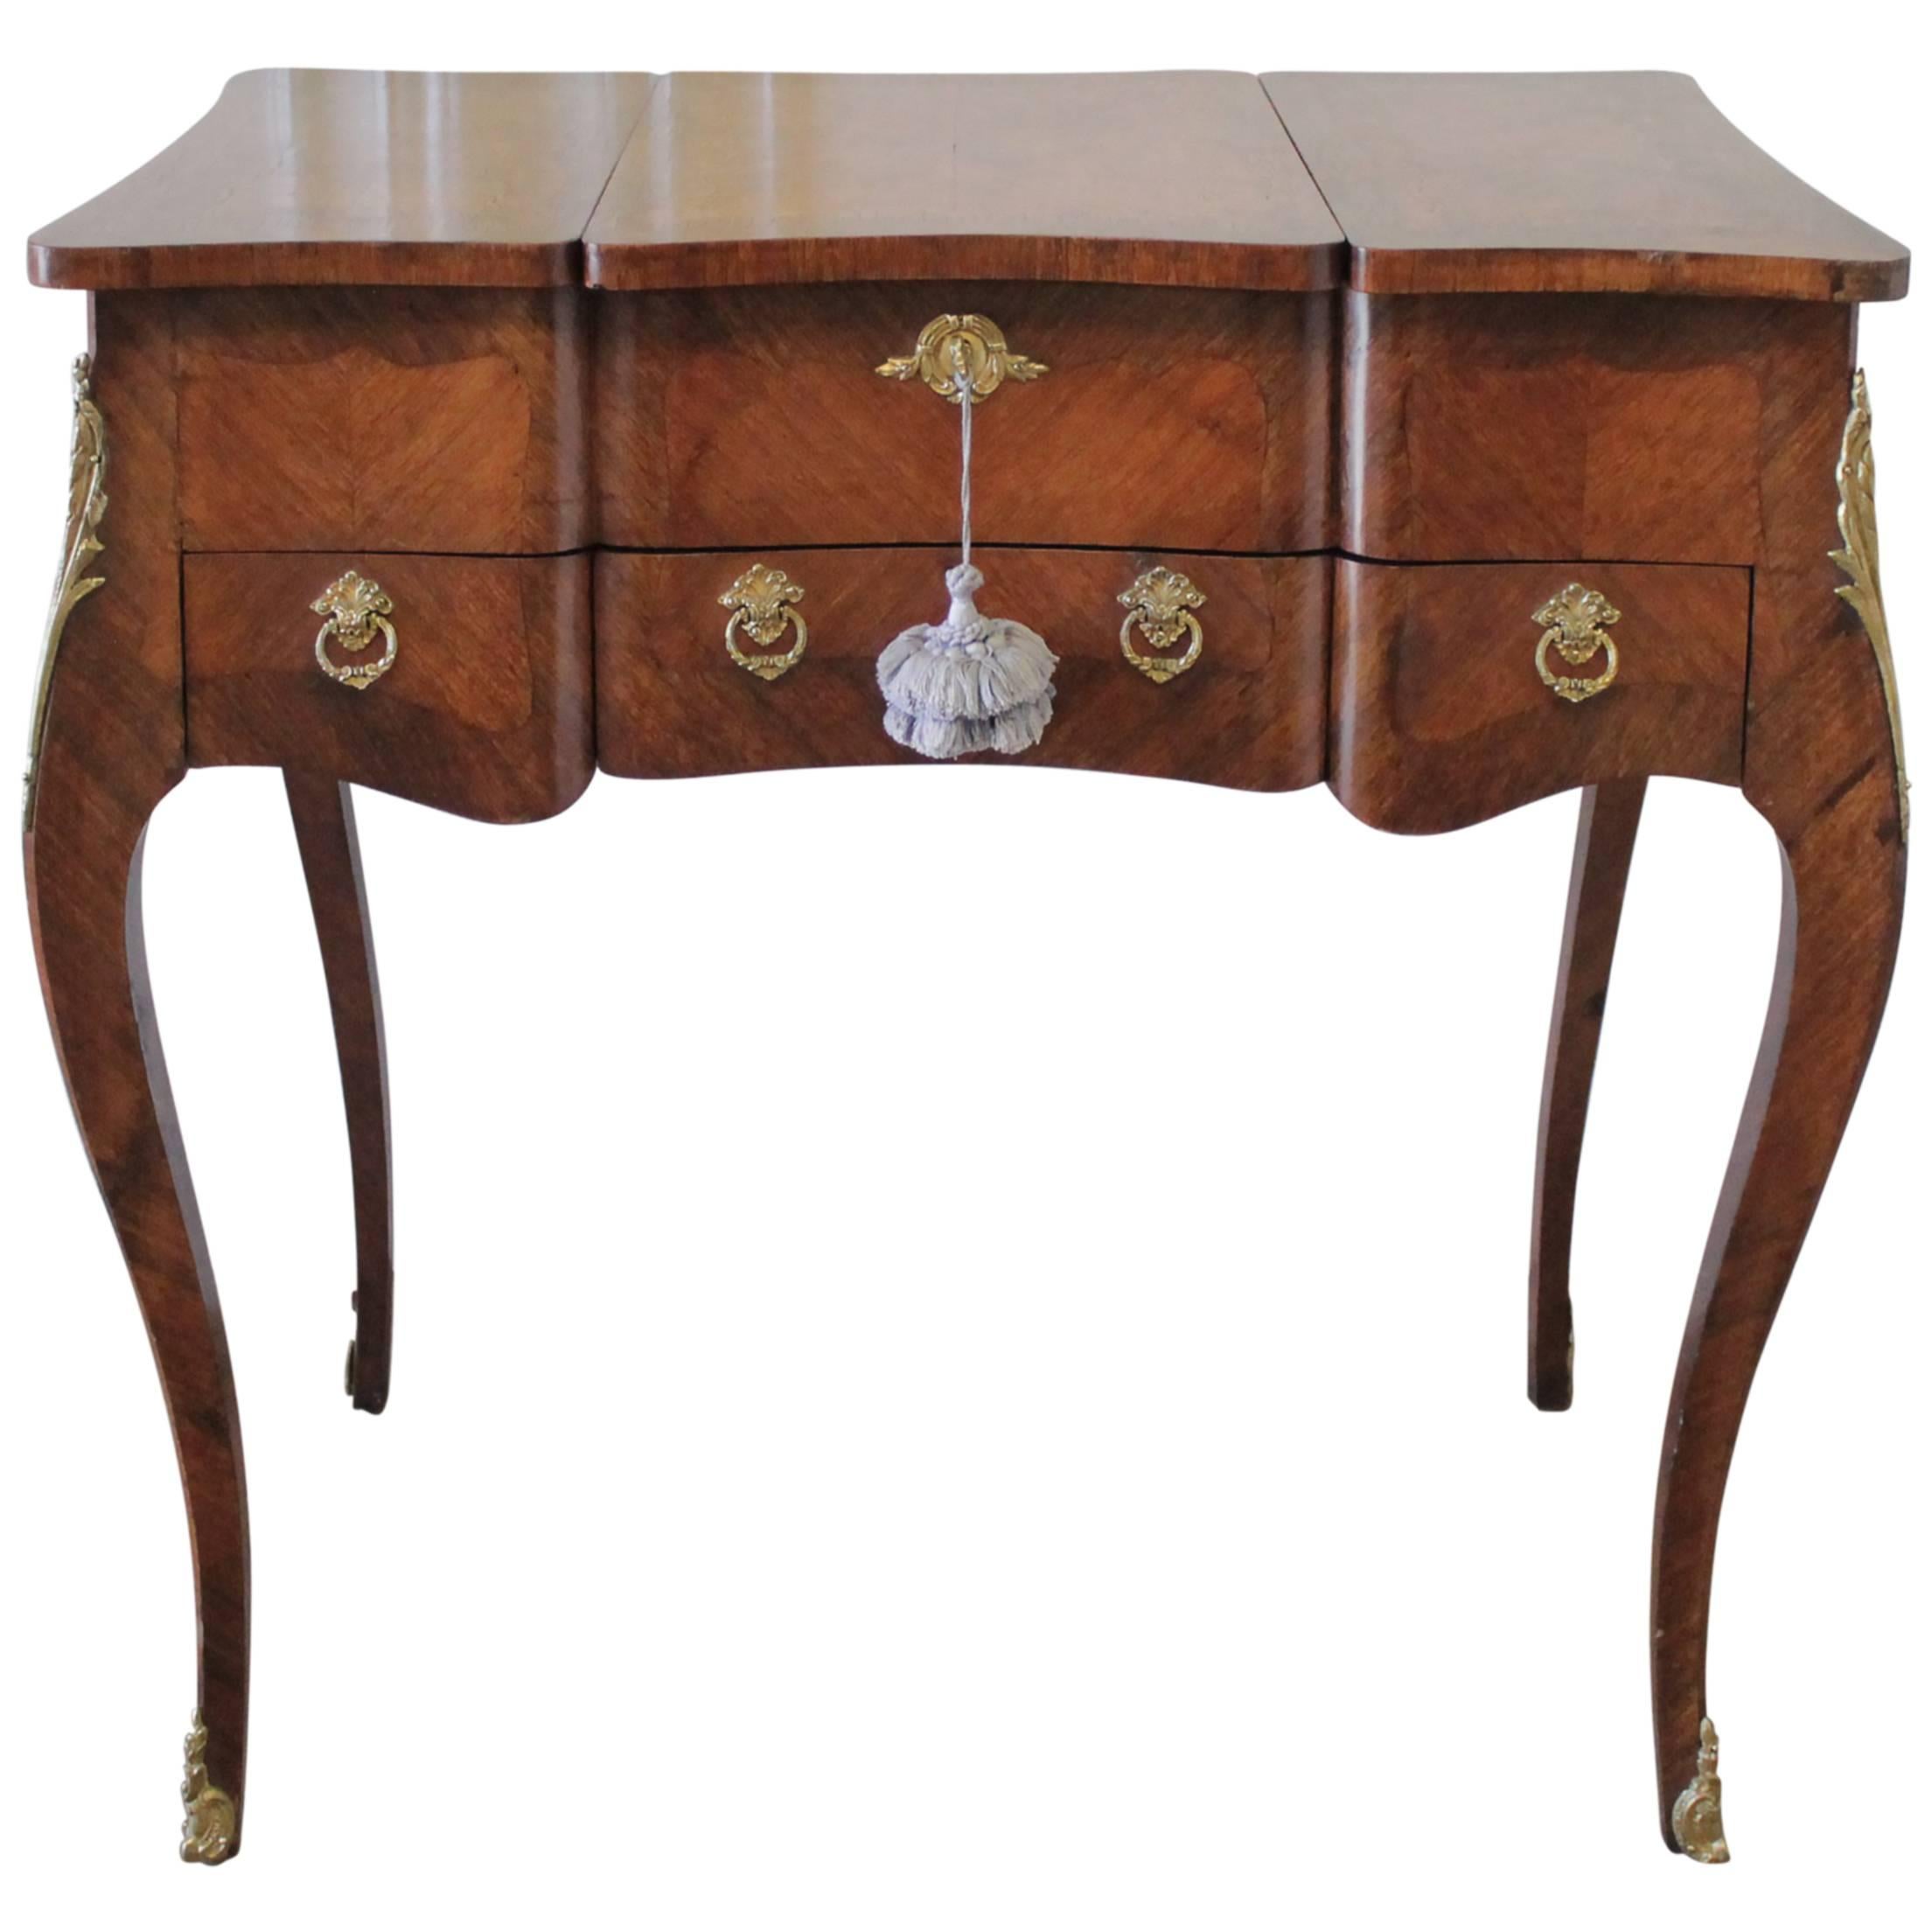 Early 20th Century Italian Inlaid Vanity with Mirror and Key